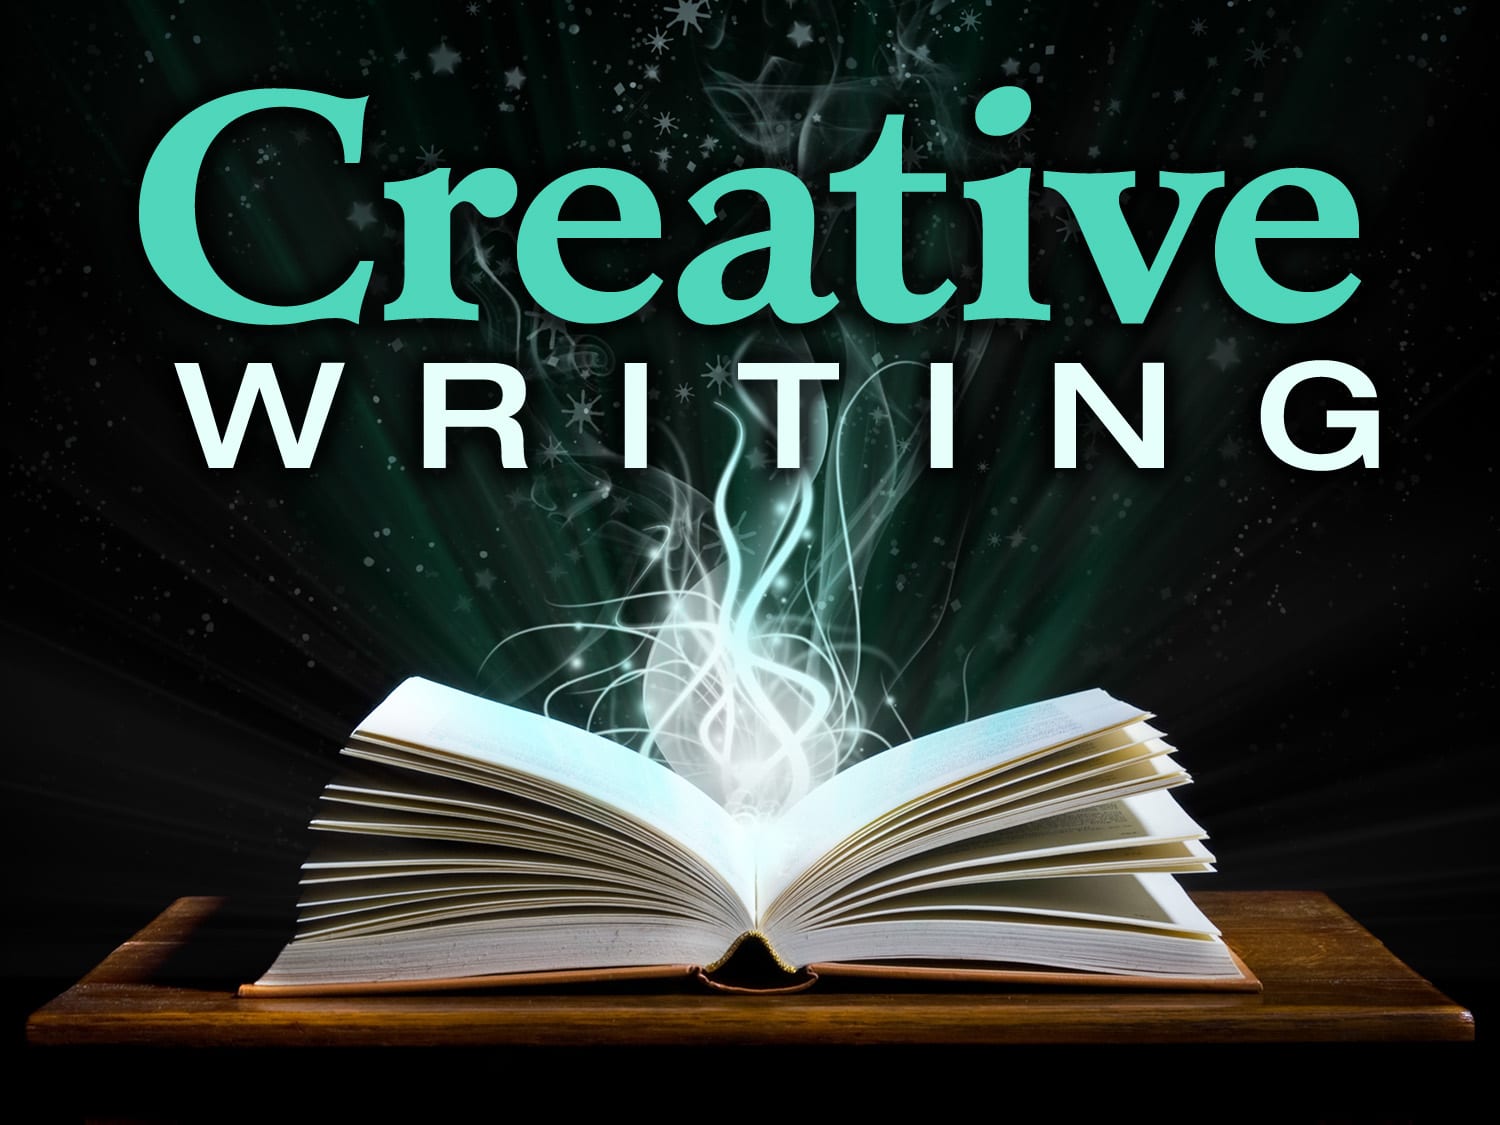 what is creative writing good for